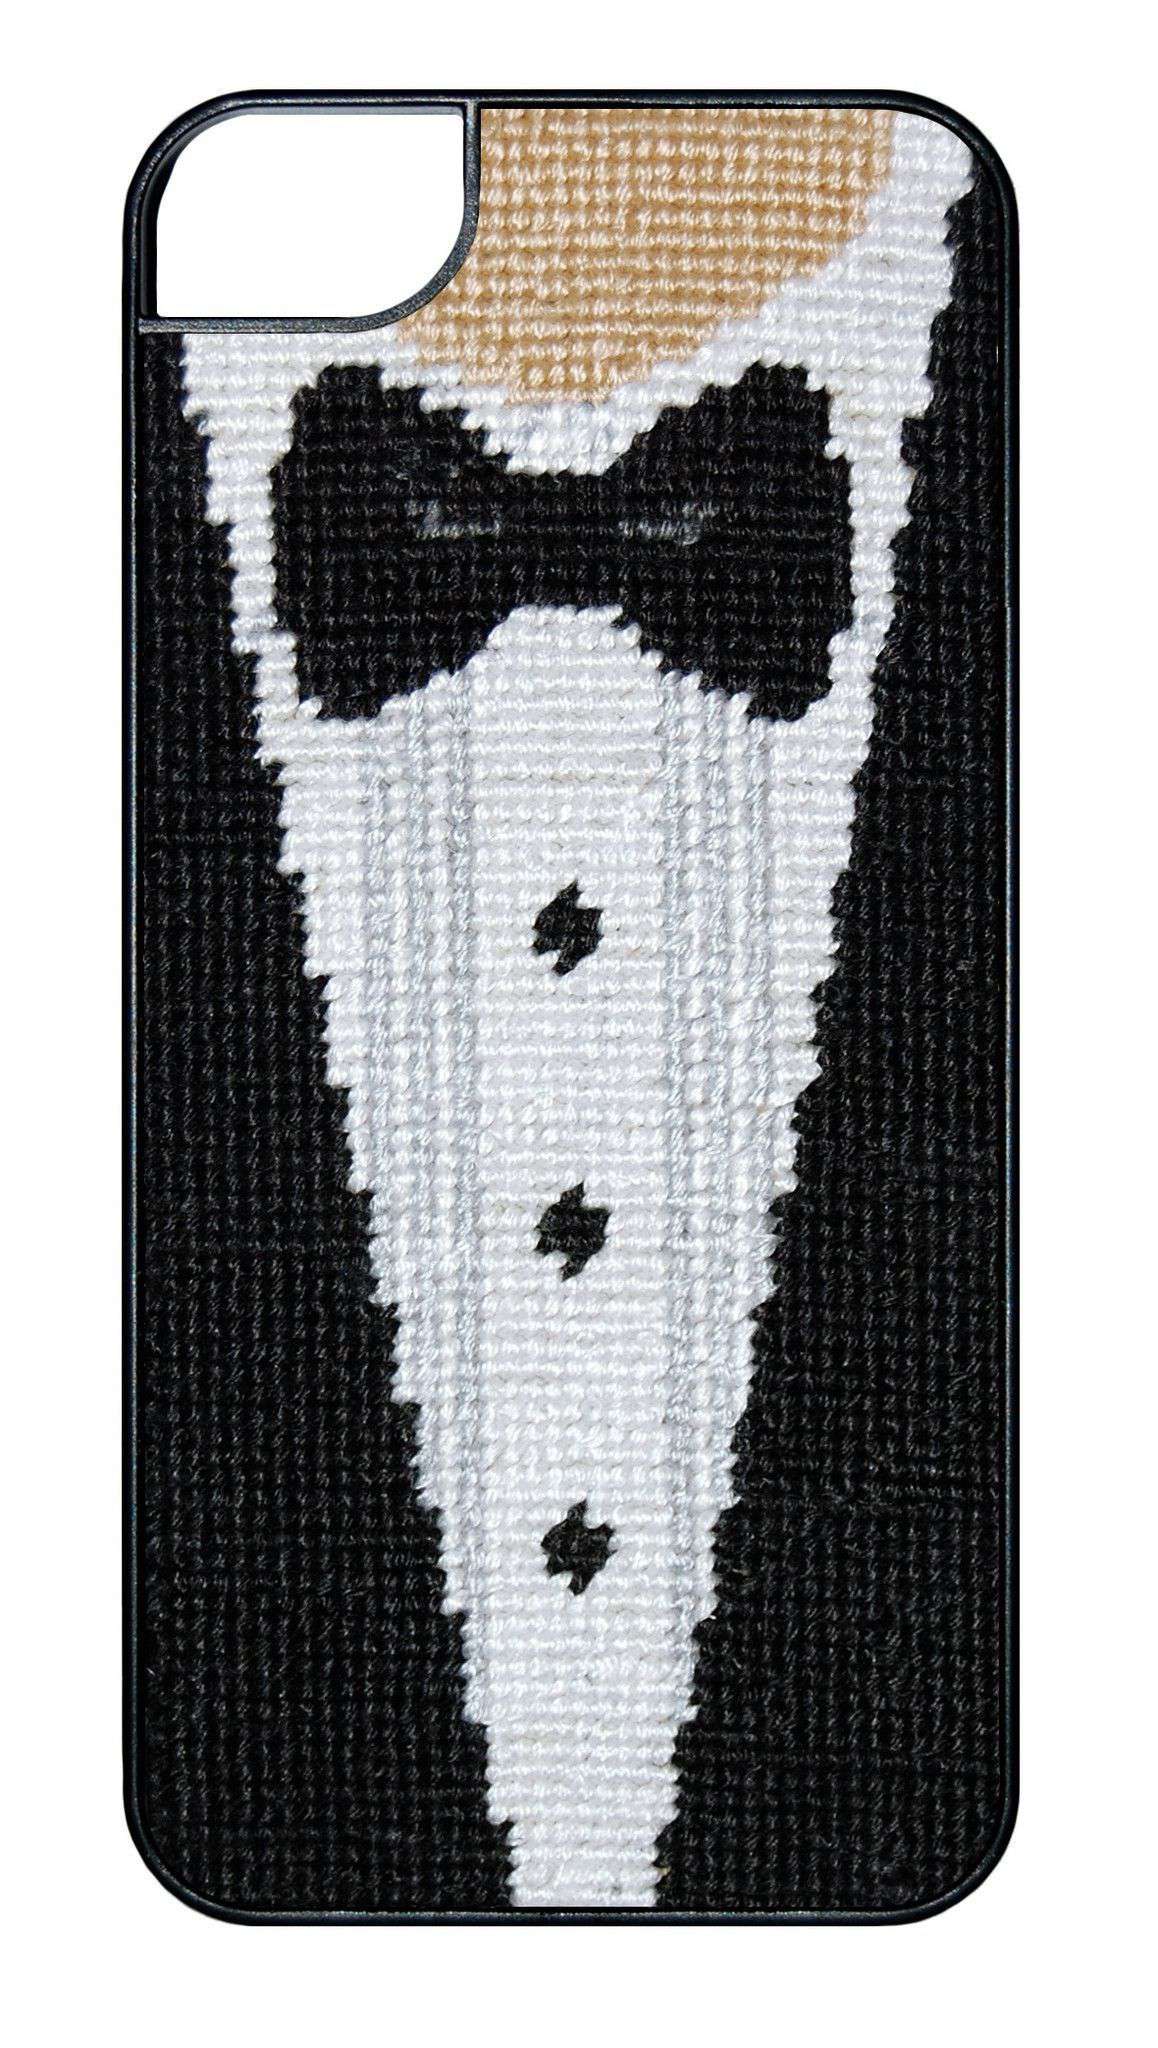 Black Tie Affair Needlepoint iPhone 6 Case by Smathers & Branson - Country Club Prep